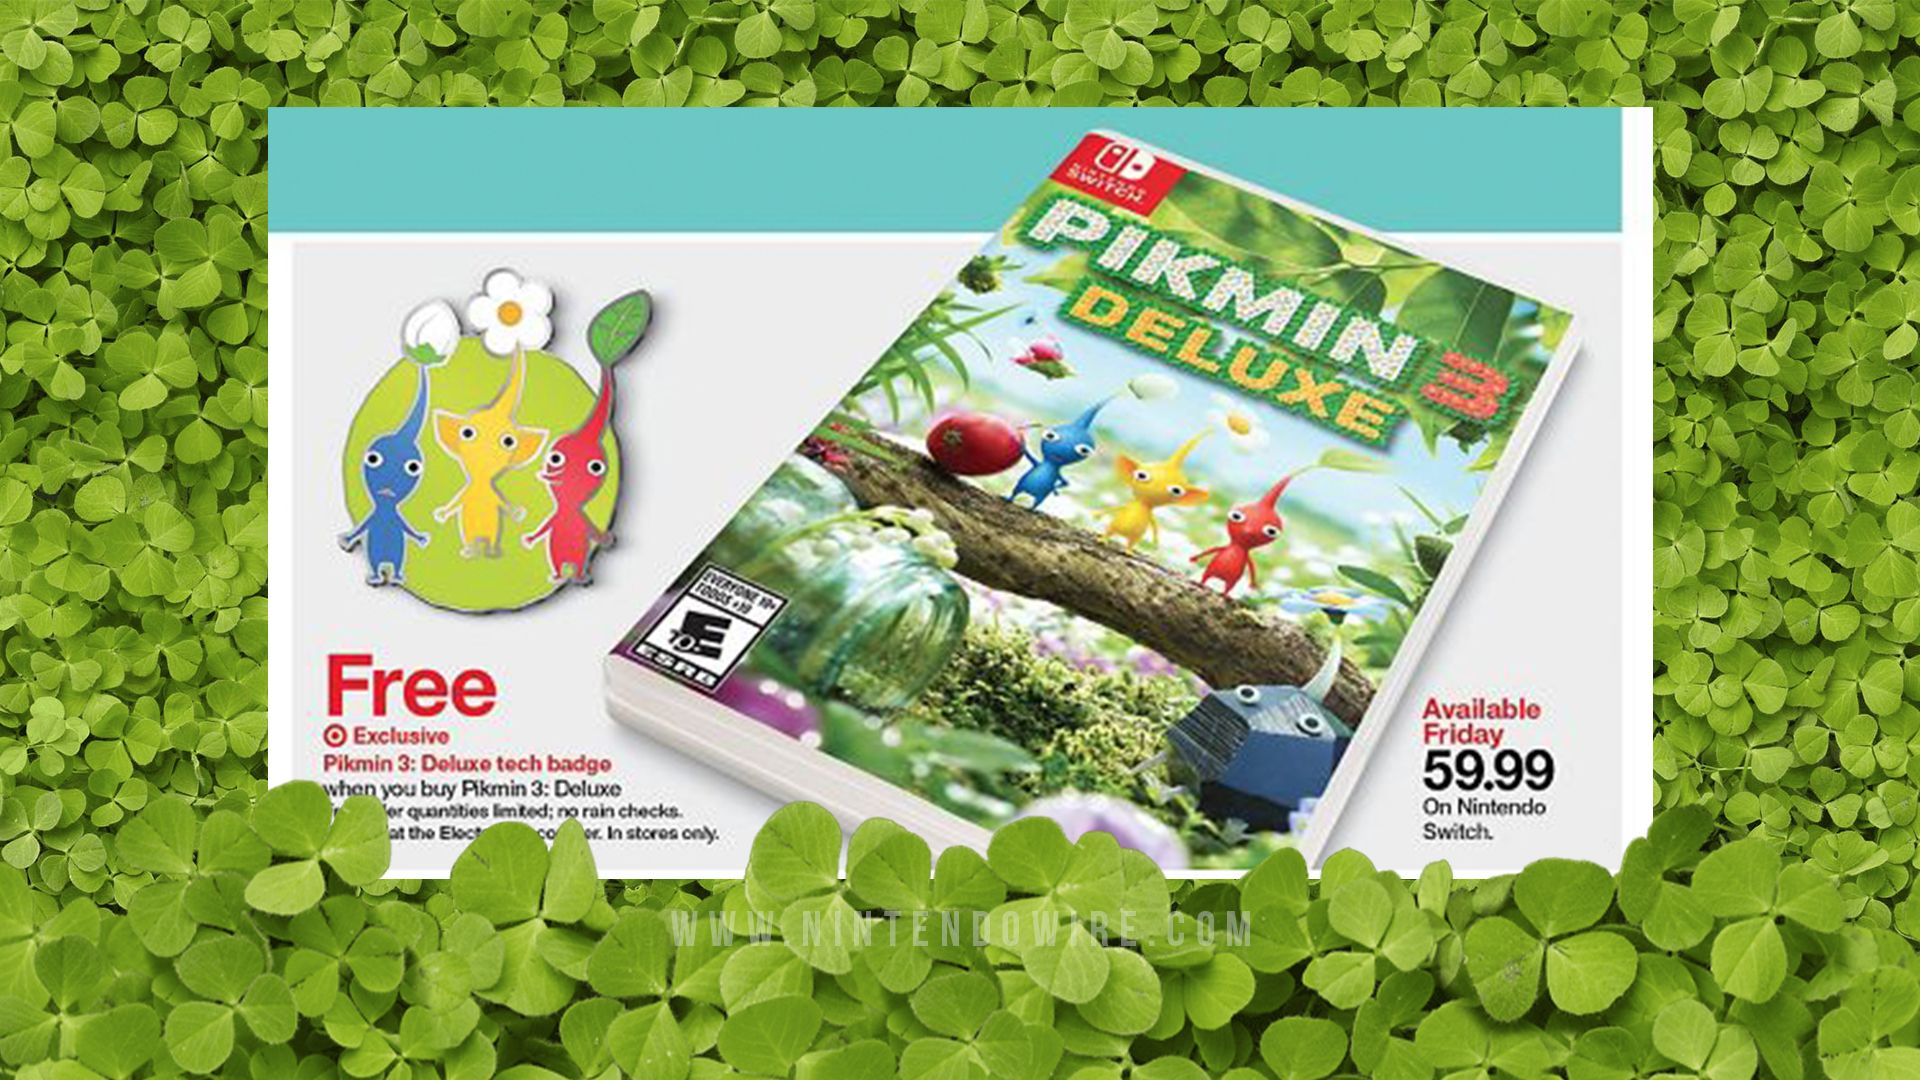 Target Offers Exclusive Pikmin 3: Deluxe Tech Badge With Purchase Of Pikmin 3 Deluxe In Store